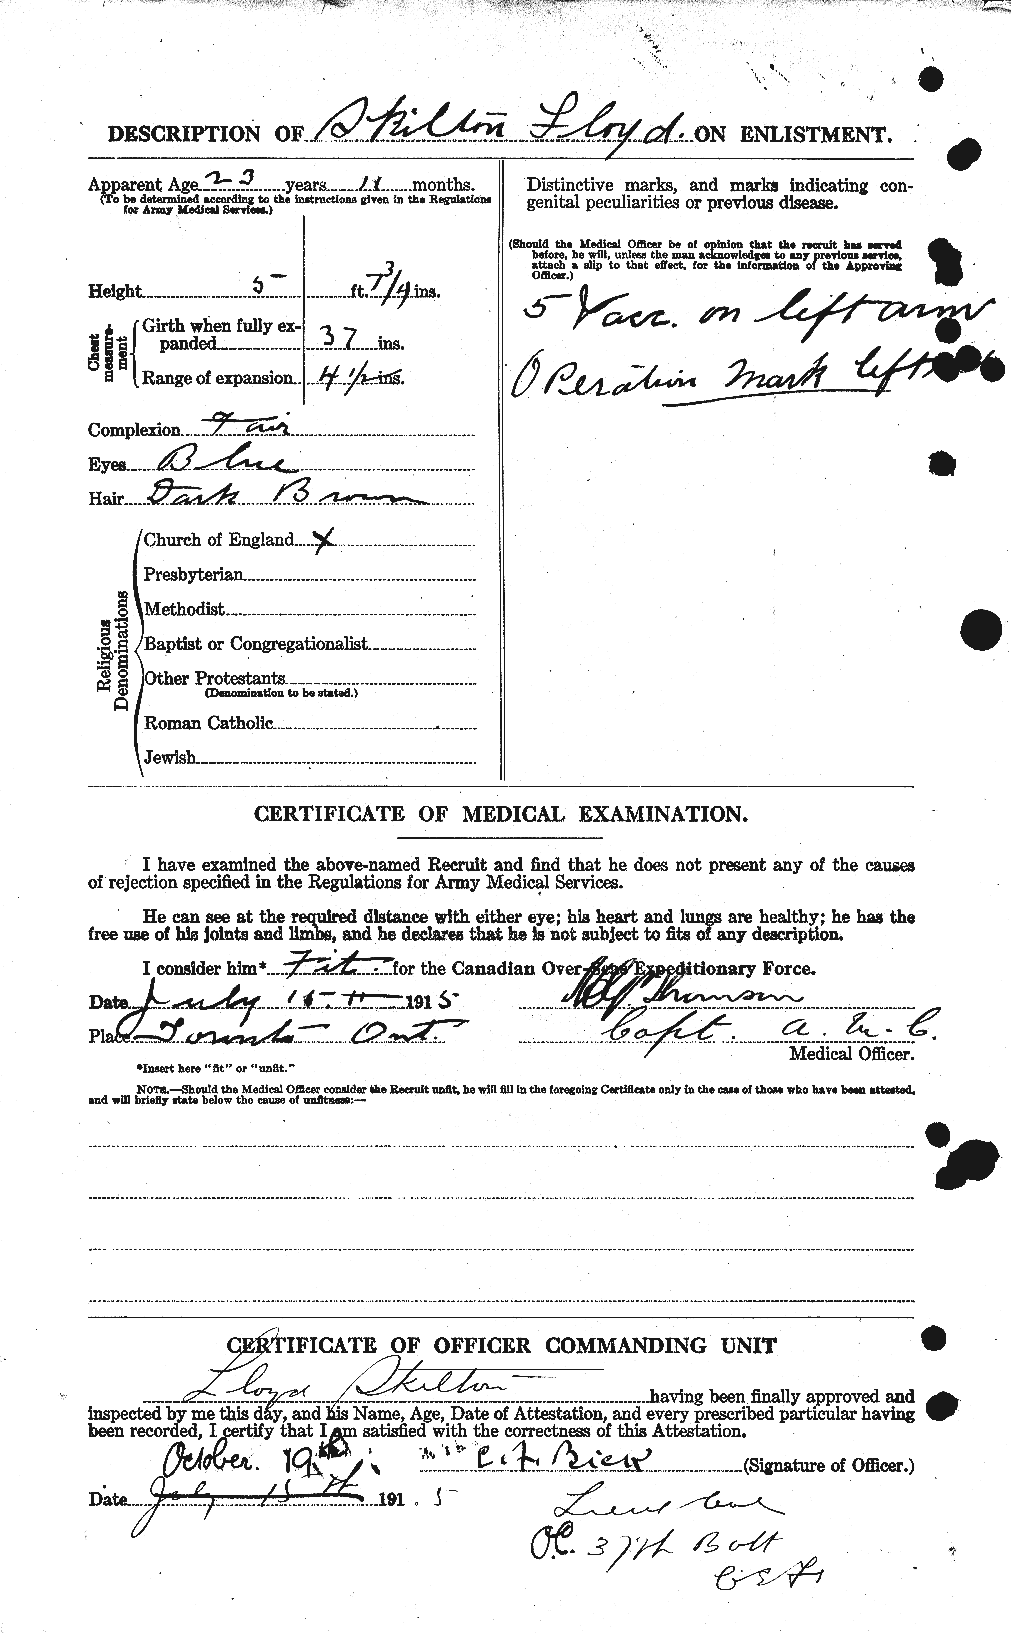 Personnel Records of the First World War - CEF 098590b